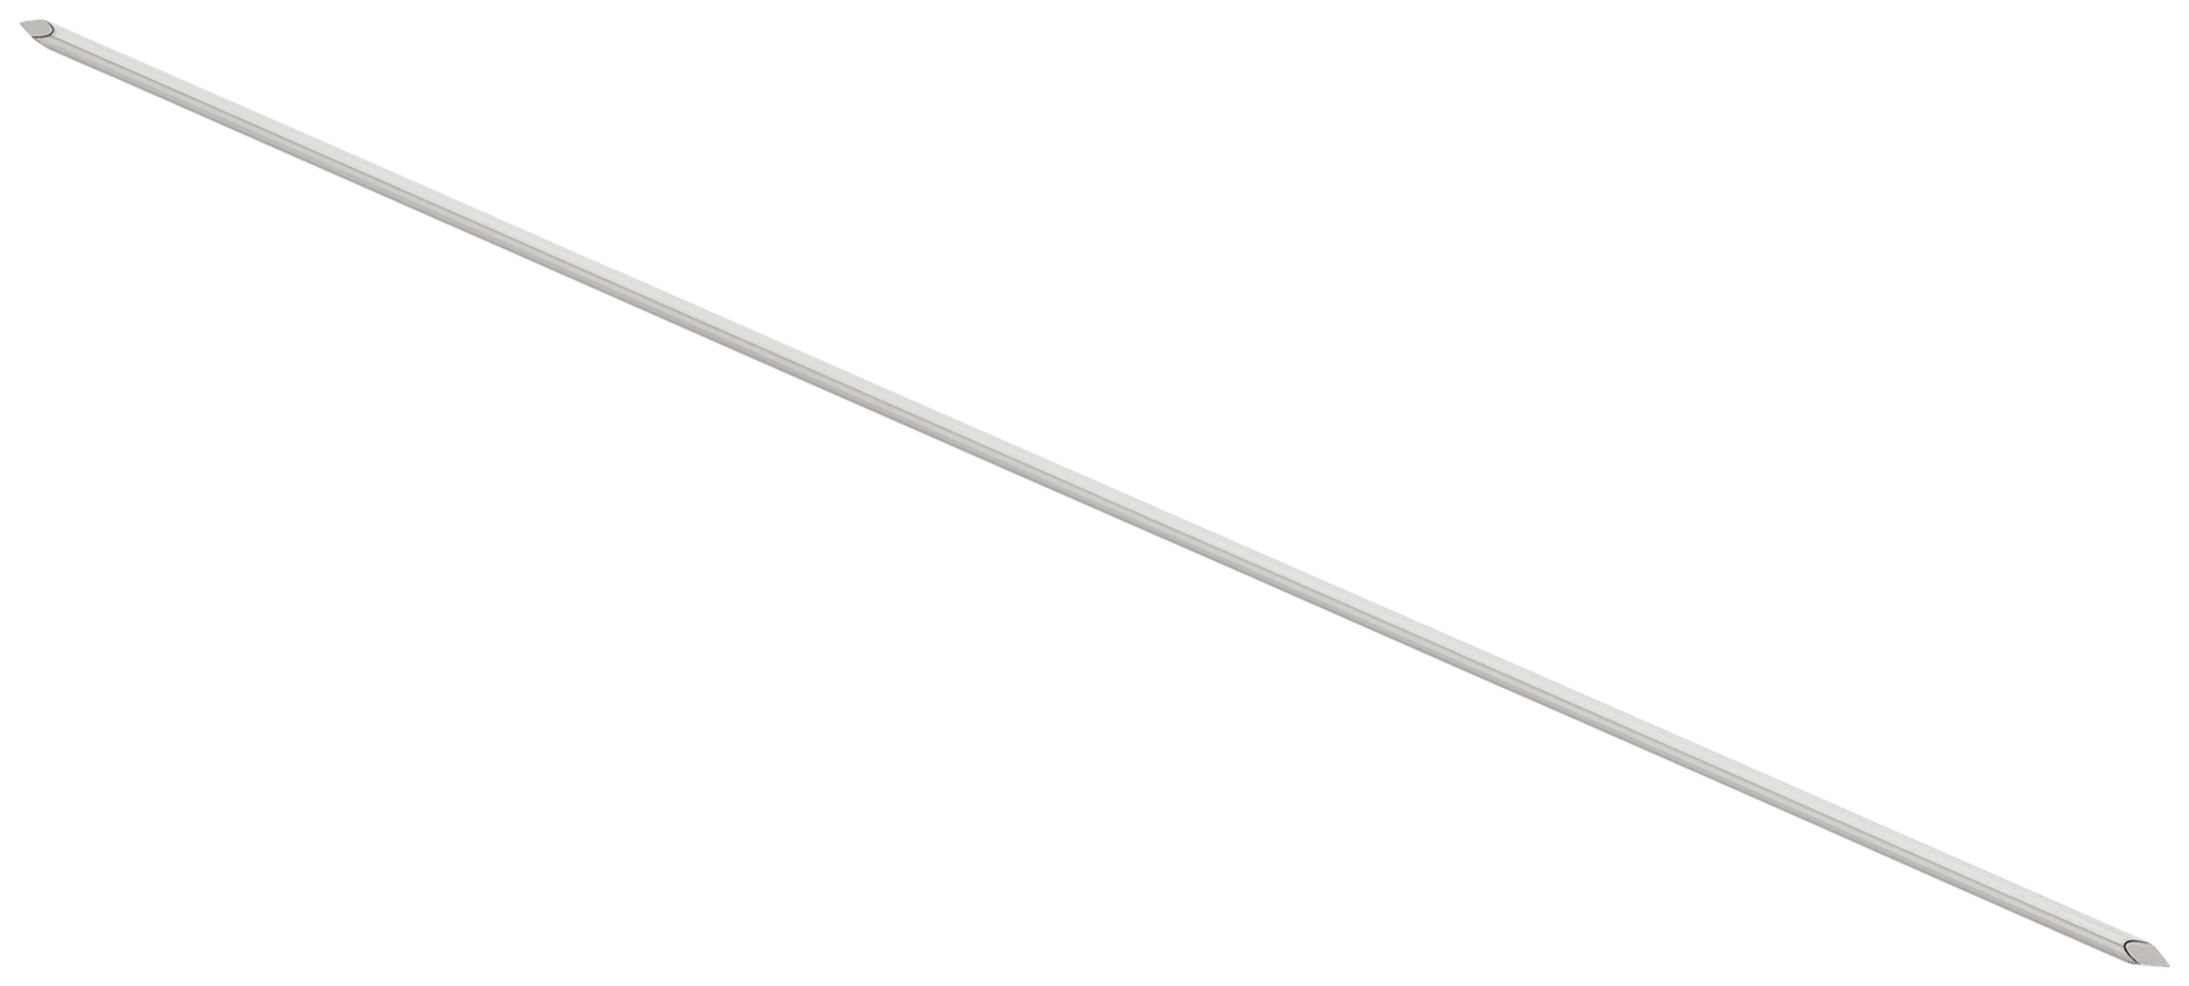 Nitinol Guidewire with Double Trocar Tip, 0.062" x 5.91" (1.6 mm x 150 mm)